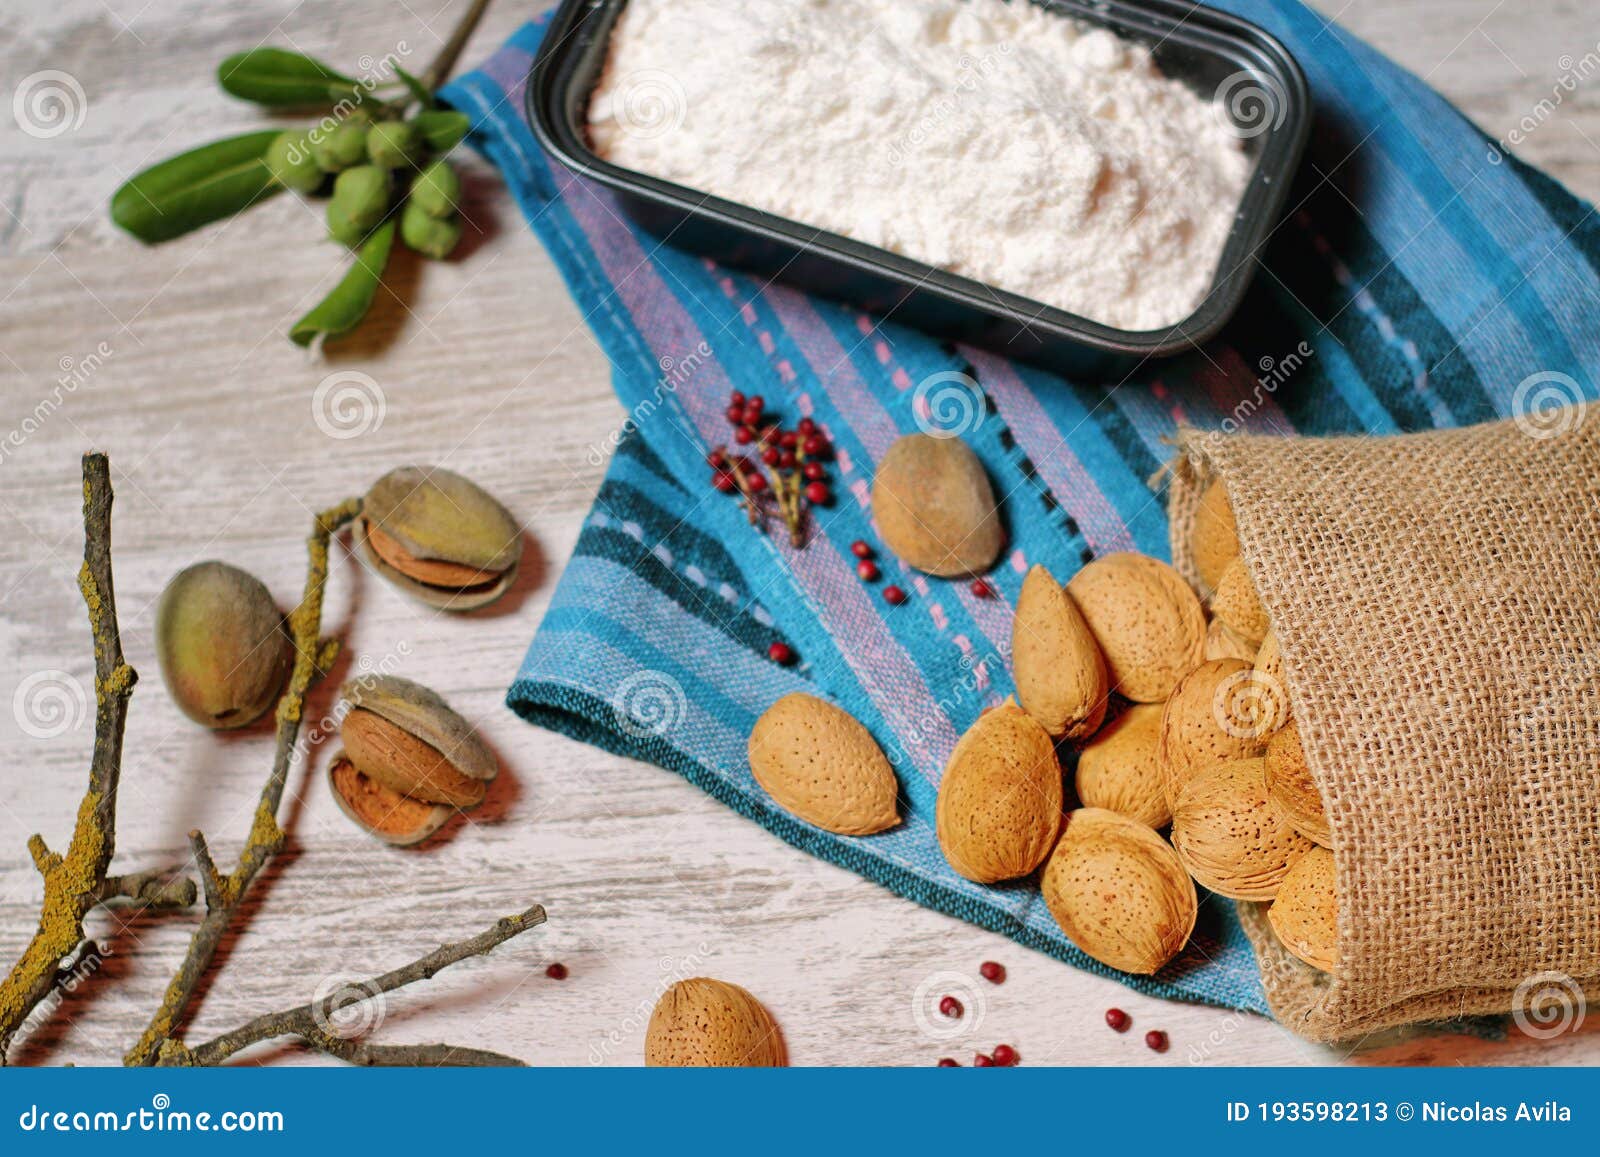 almonds in a cloth bag and container with flour ii